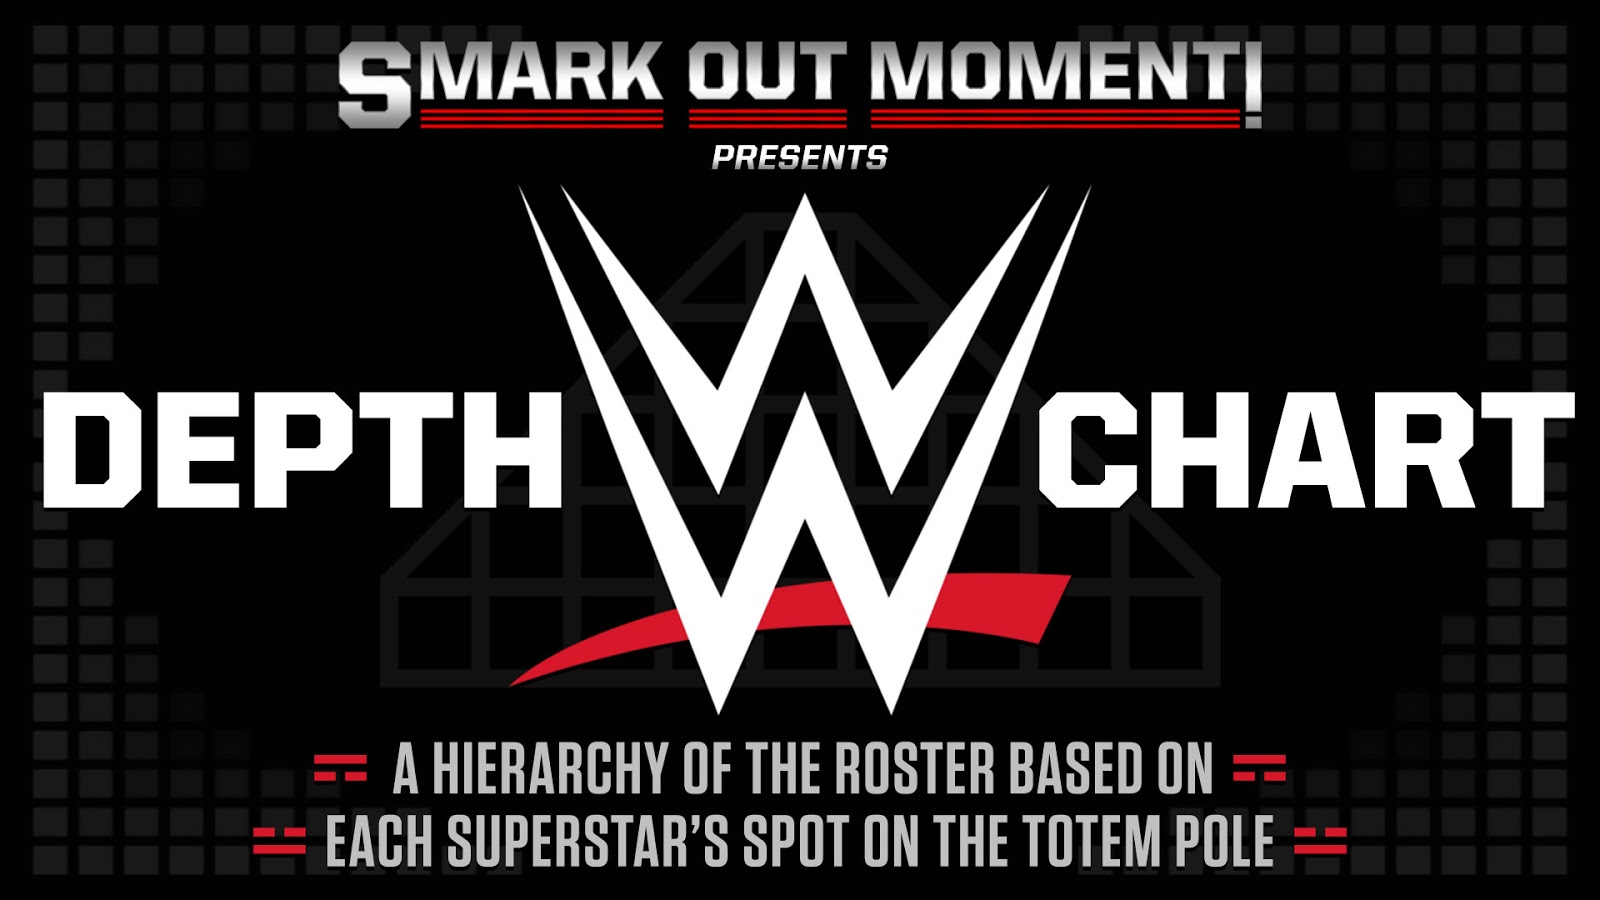 Wwe Roster List Hierarchy Of Superstars Wwe Depth Chart Of Wrestlers Smark Out Moment